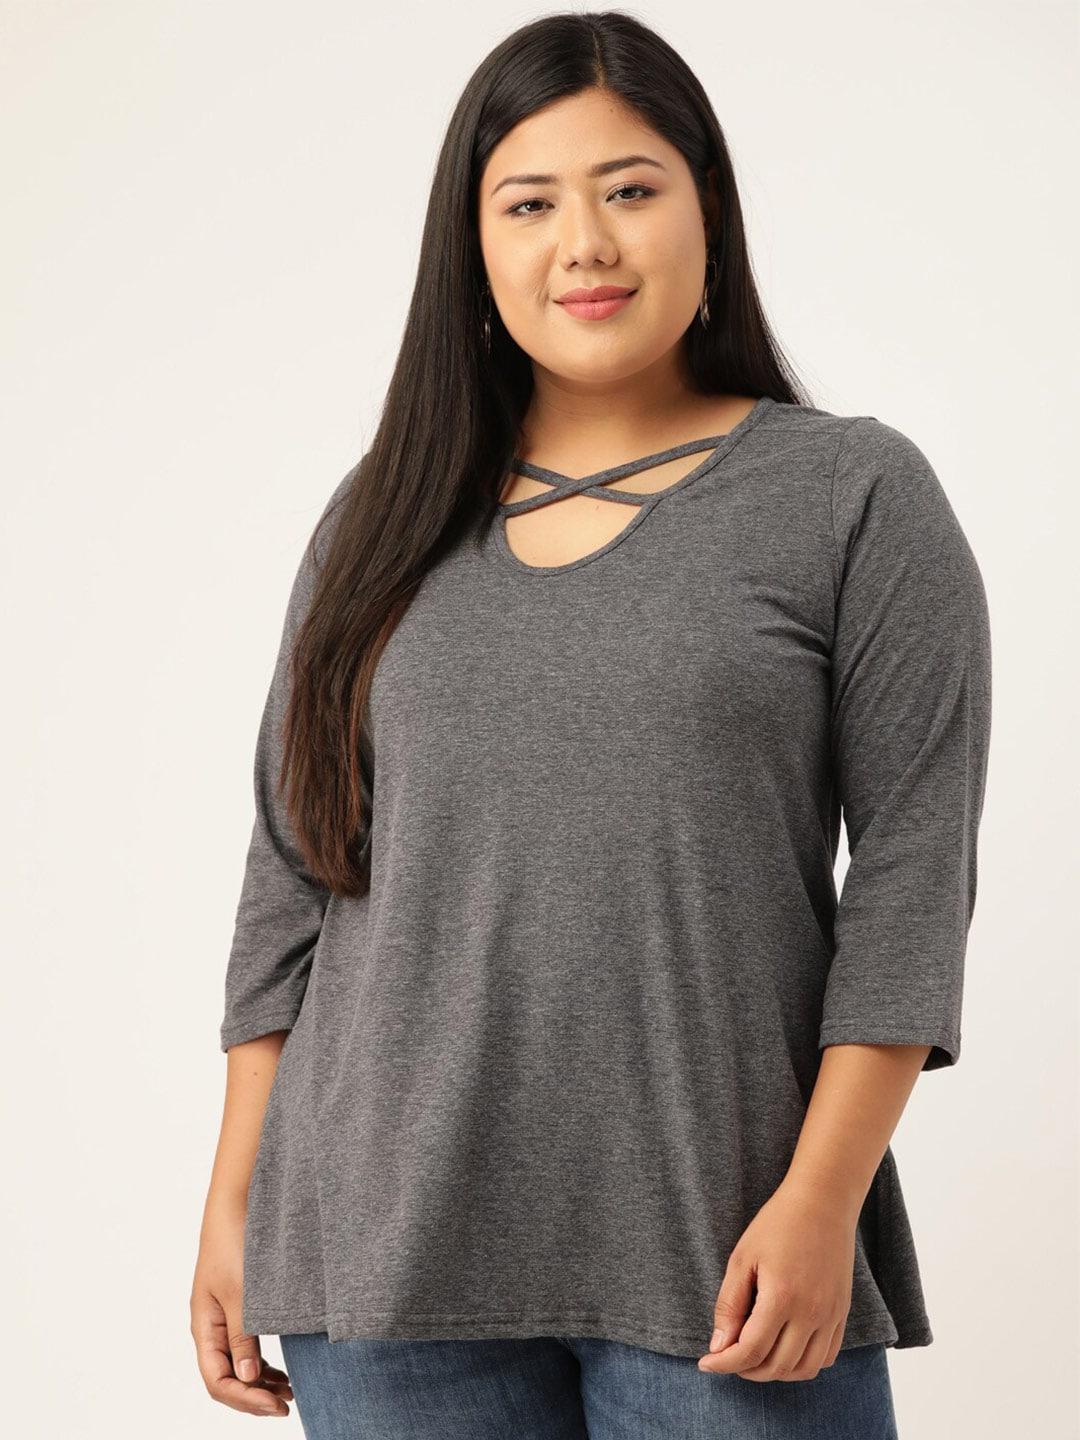 theRebelinme Plus Size Women Charcoal Solid Cut-Out Neck Top